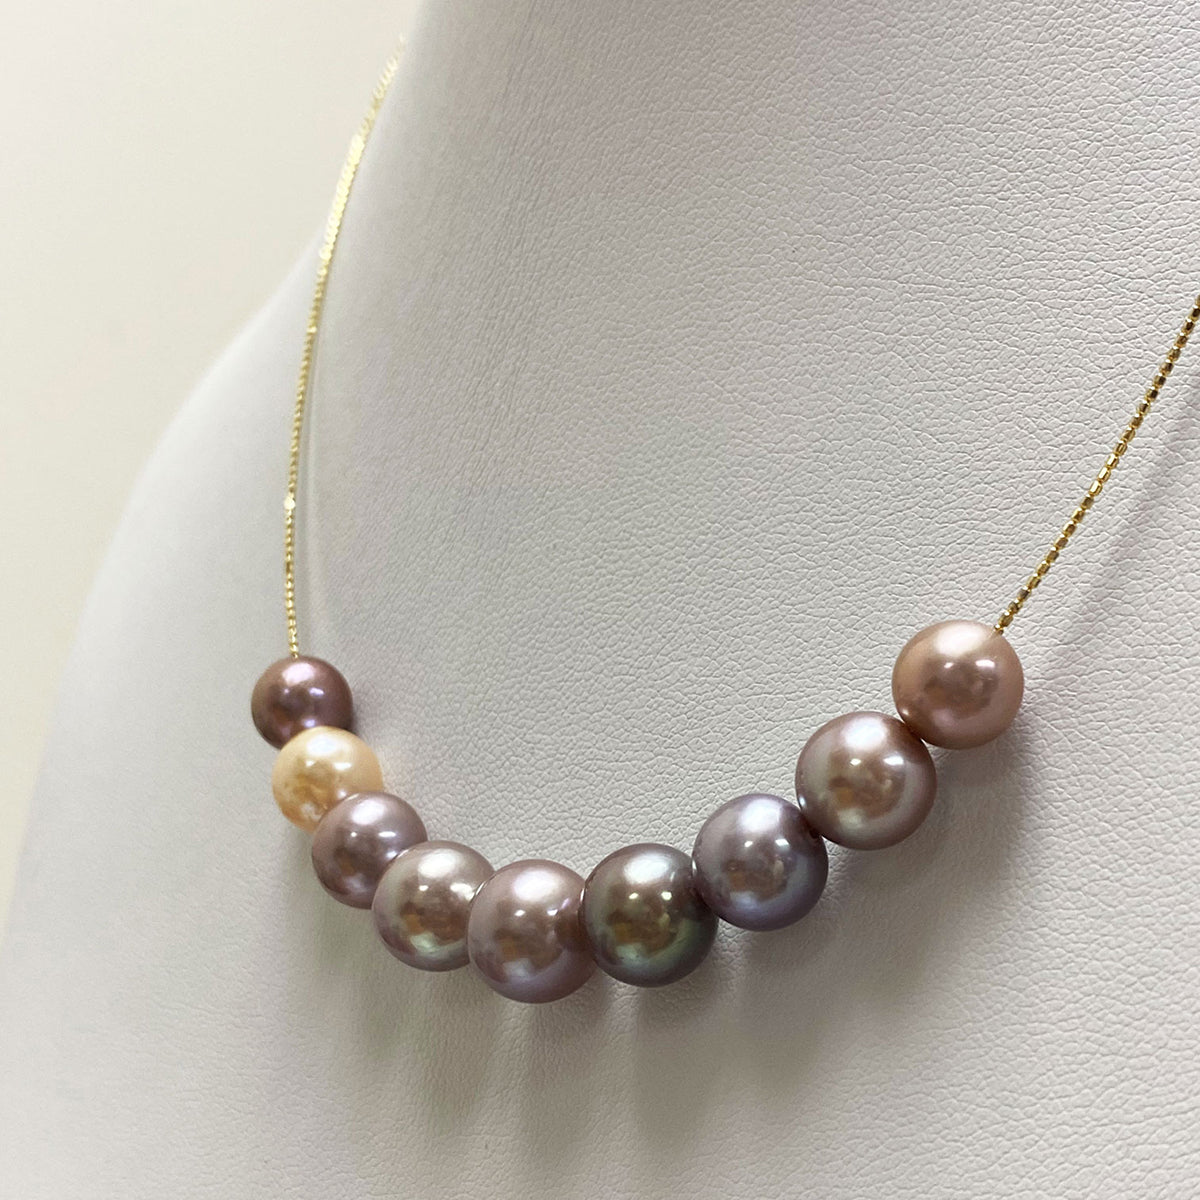 Lucia Fresh Water Multi Tone Pearl Necklace | necklace | 18" necklace, contrasting color pearl ncklace, cultured pearls, Fine Jewelry, fresh water pearl necklace, new arrivals, pearl choker, pearls necklaces, S925 necklace, S925 pendant, sterling silver necklace with pearls, unique pearl | Dikuza